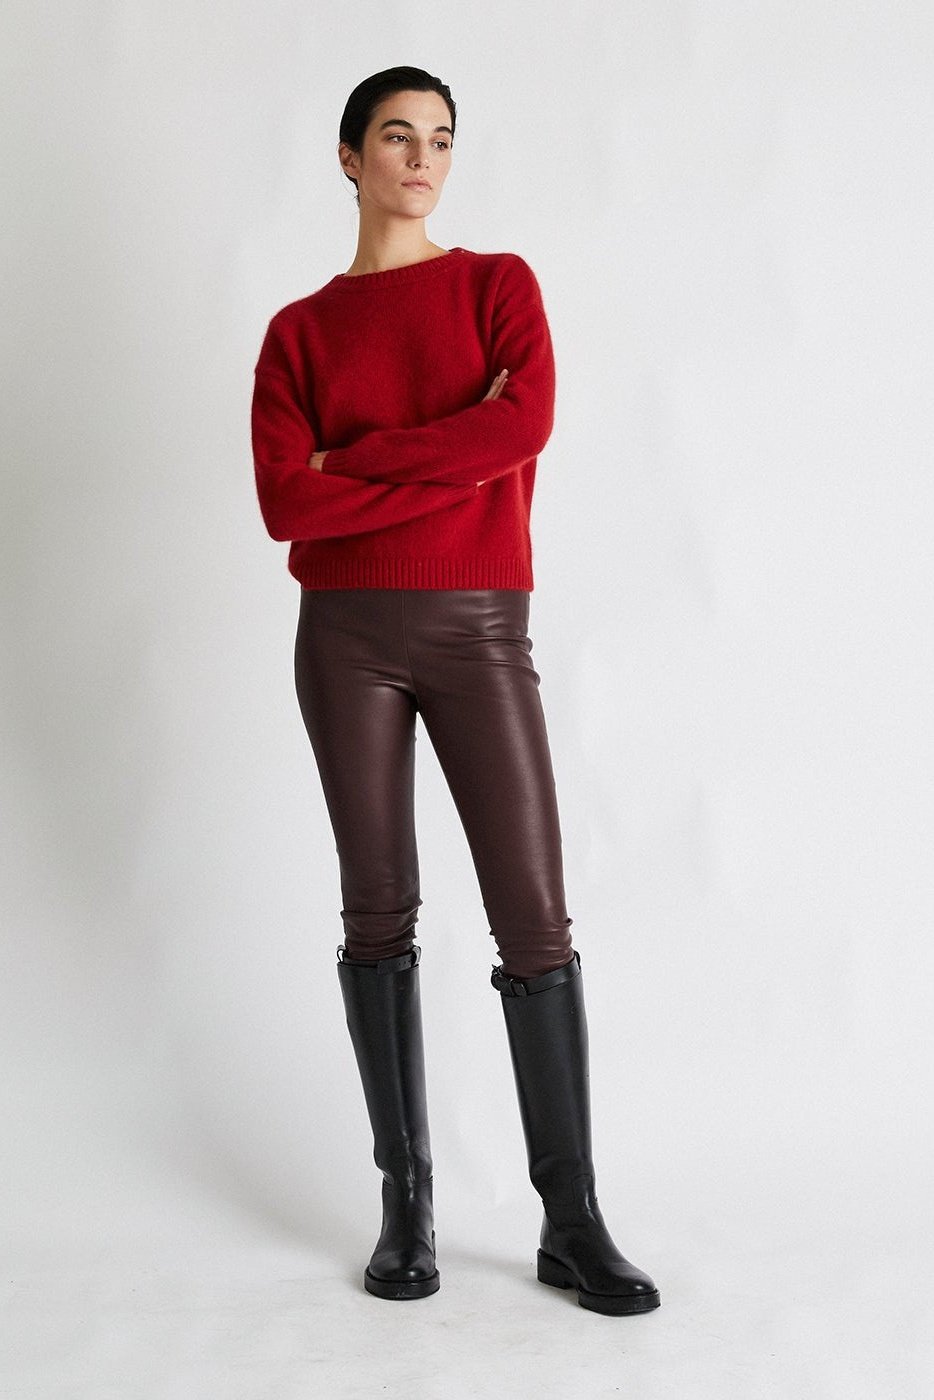 +Beryll Cashmere Sweater Holly | Cherry Red - +Beryll Holly Cashmere Sweater | Cherry Red - +Beryll Worn By Good People